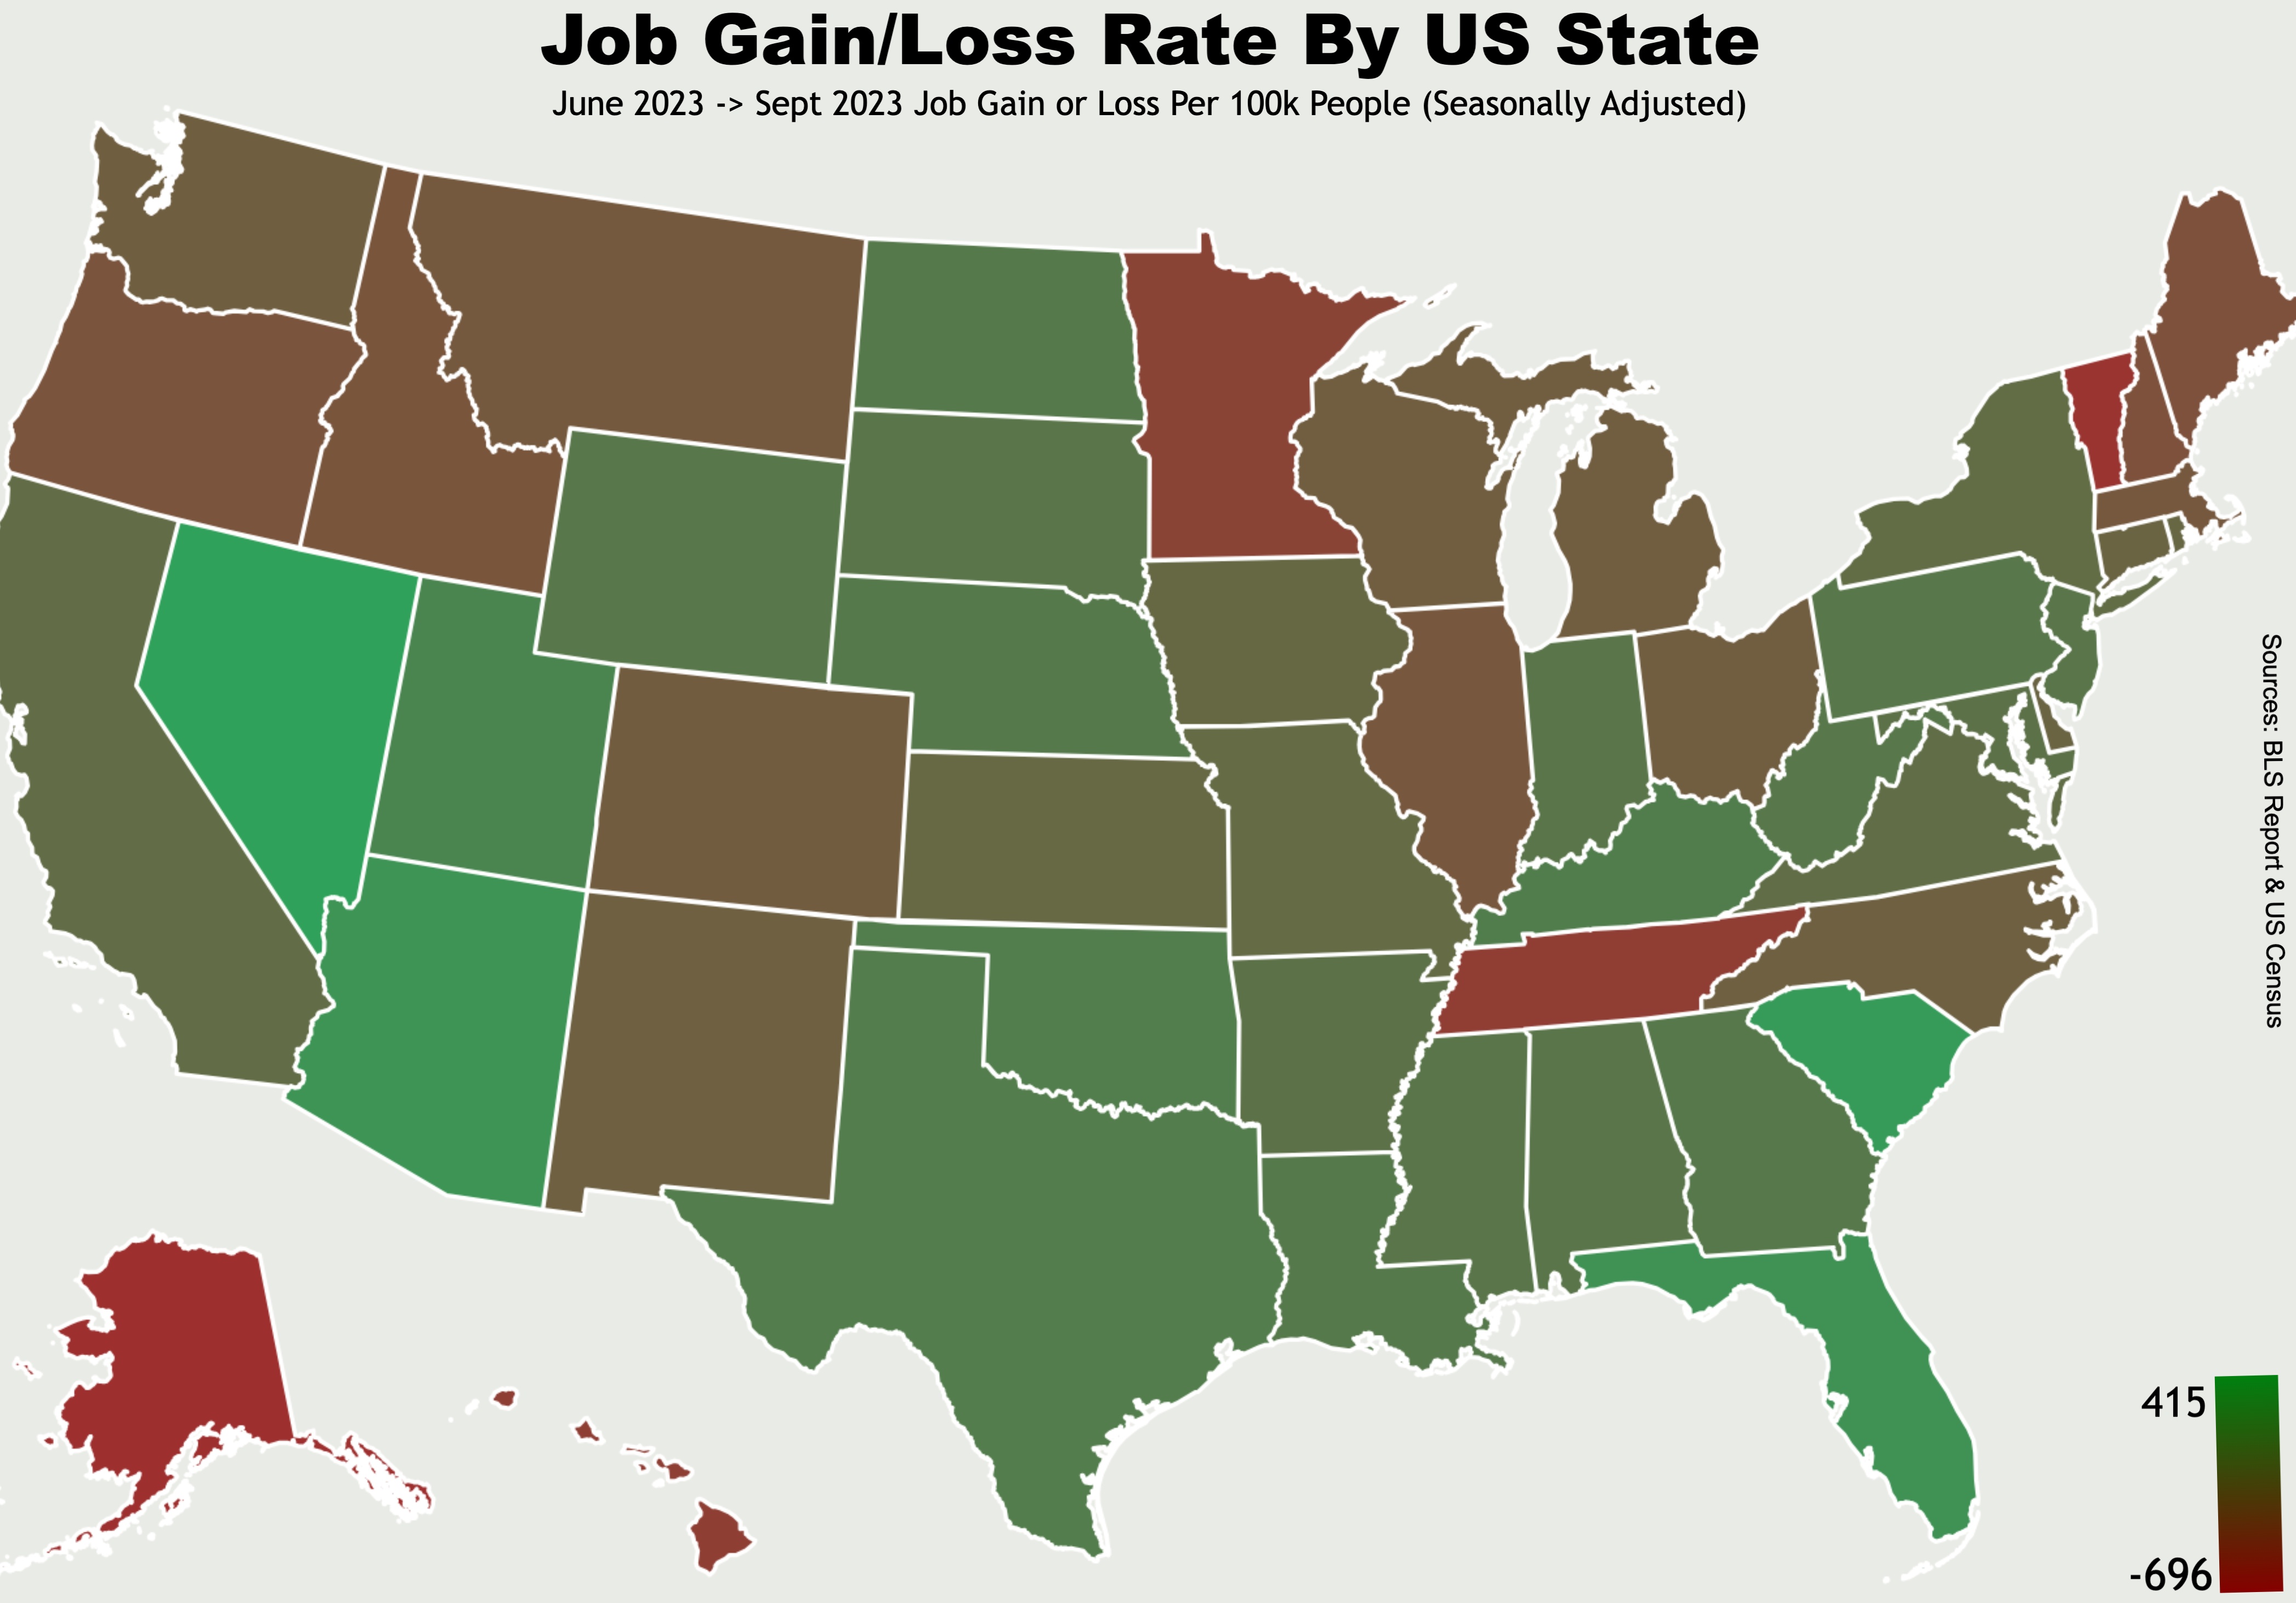 US States Job Gain or Loss From June 23 to Sept 23